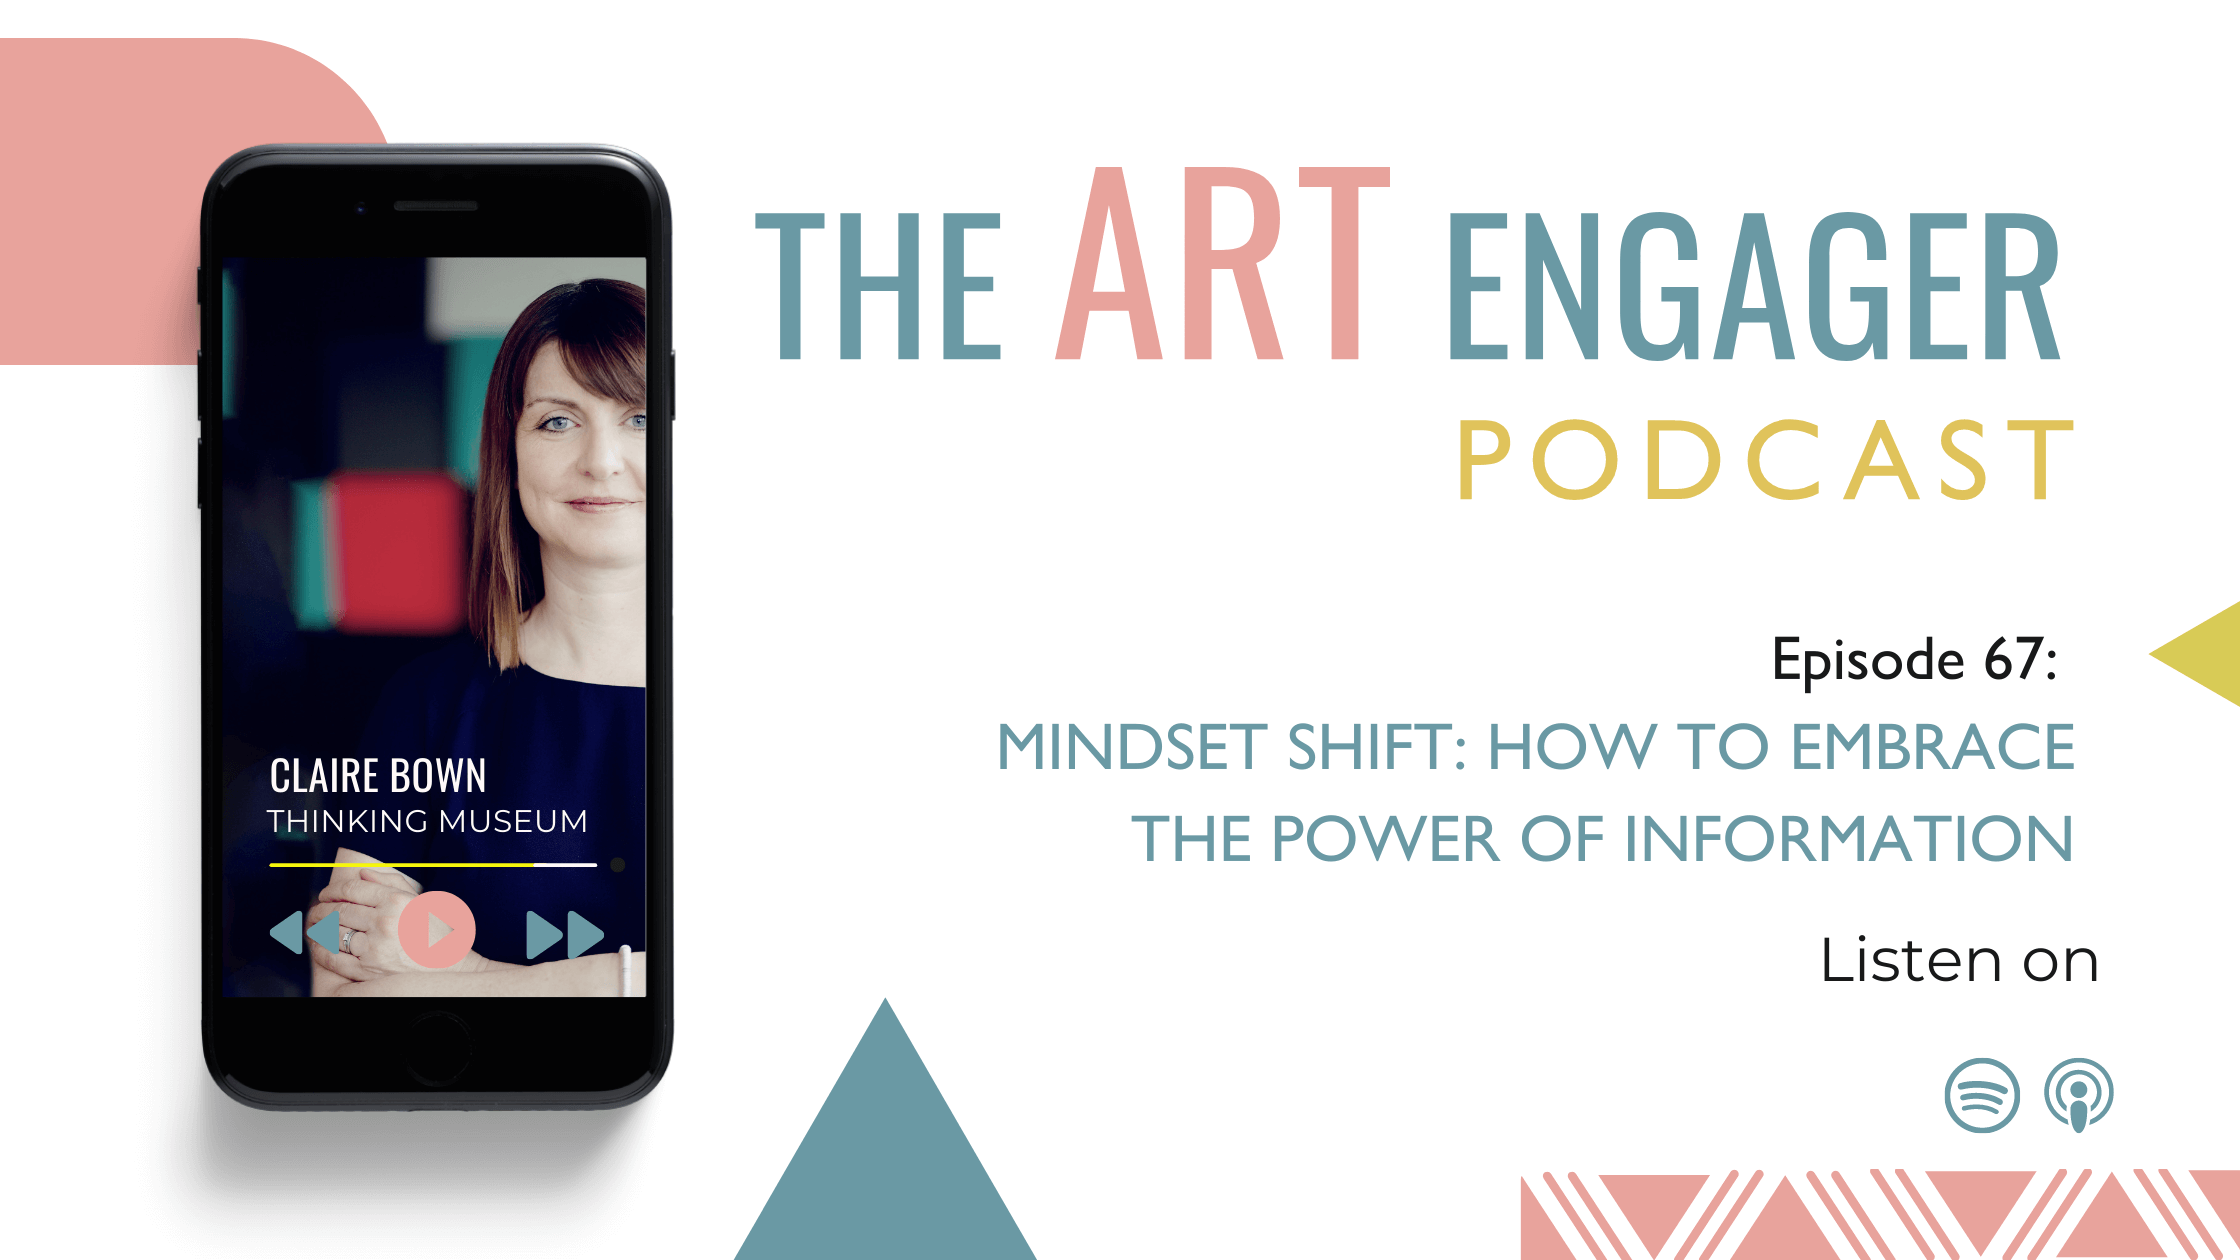 Mindset shift: how to embrace the power of information